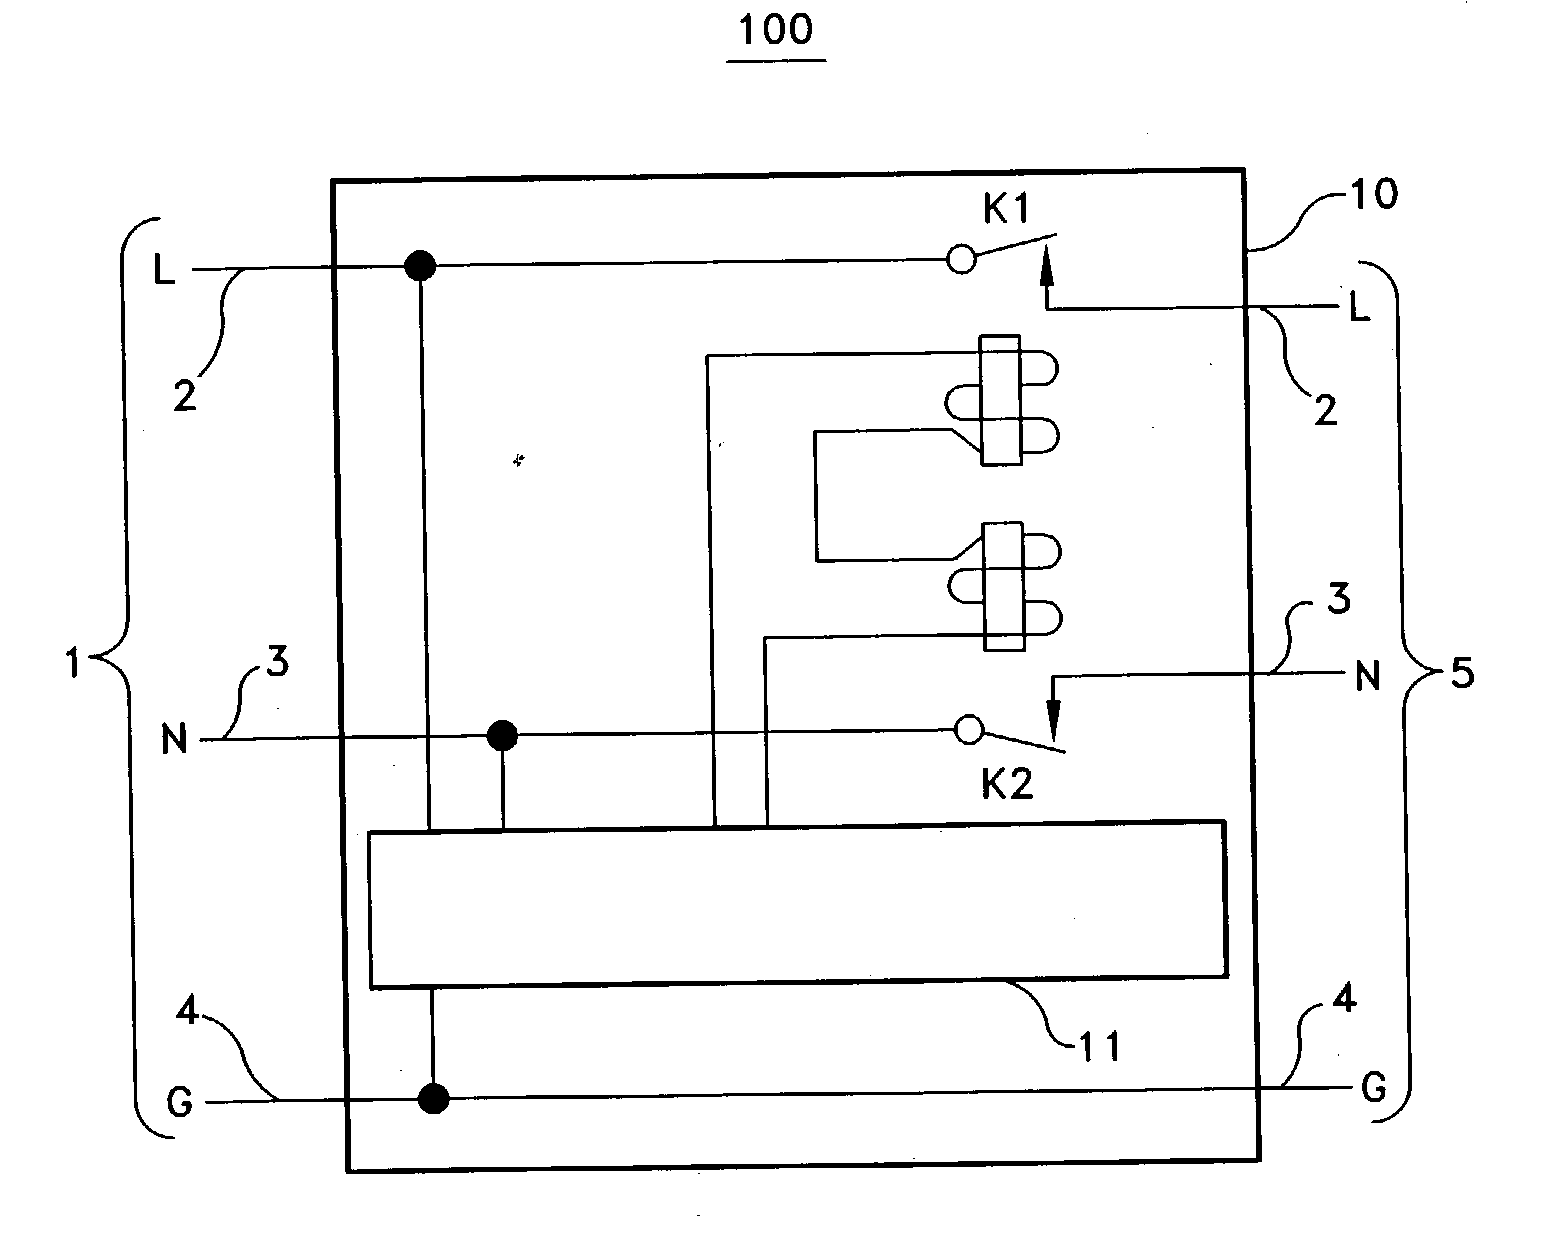 Electrical over/under voltage automatic disconnect apparatus and method